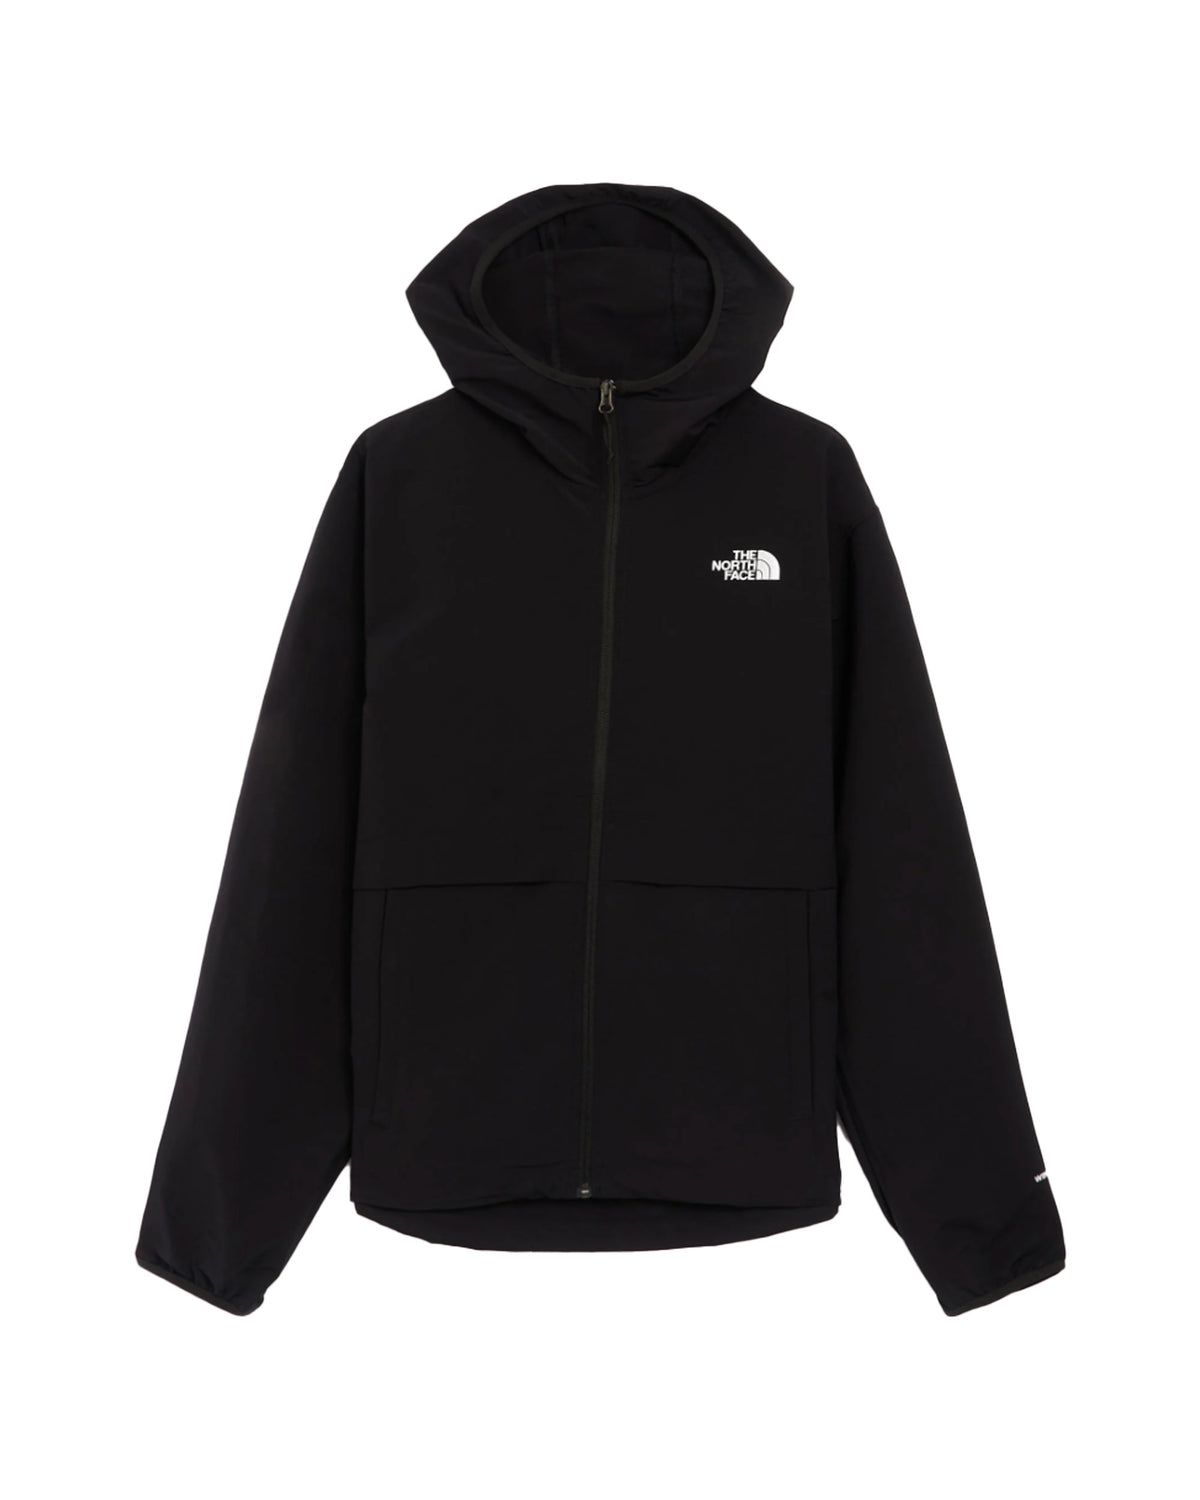 Giacca Uomo The North Face Easy Wind FZ Jacket Black